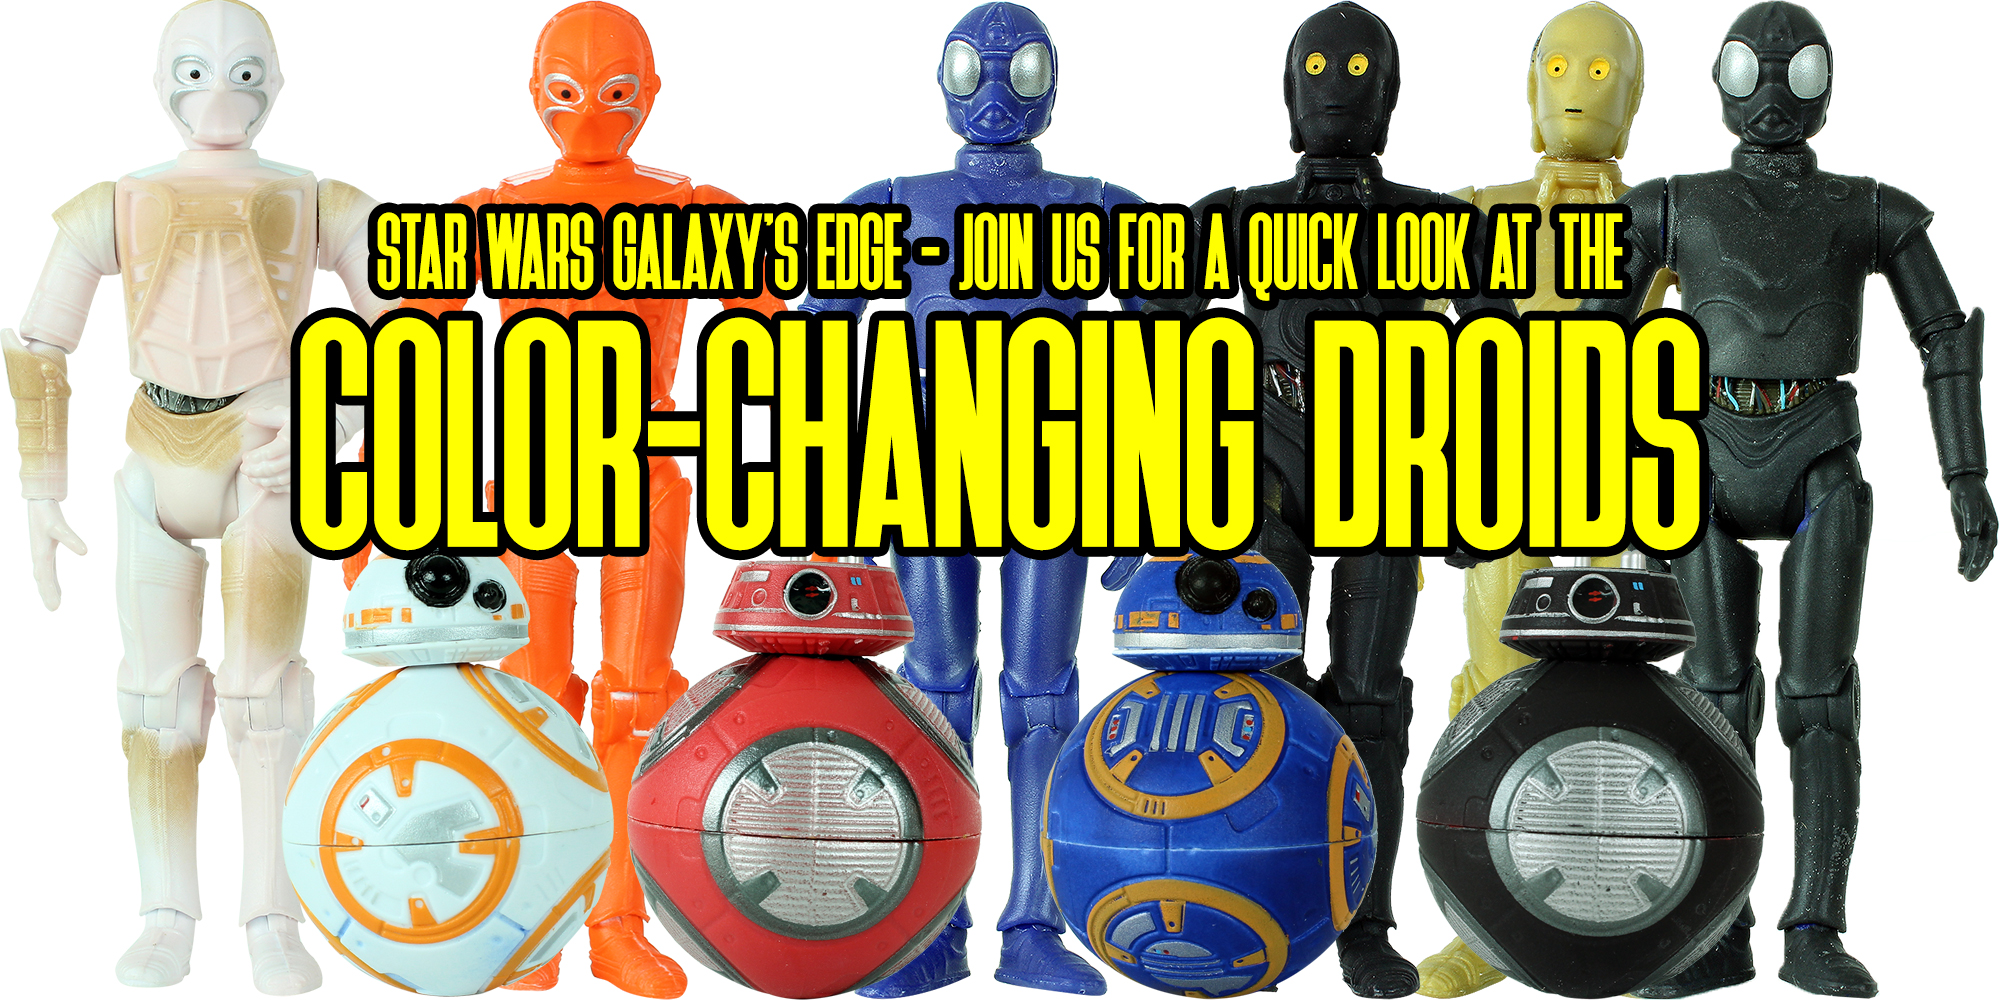 Star Wars Galaxy's Edge - A First Look At The 3.75" Color-Changing Droids